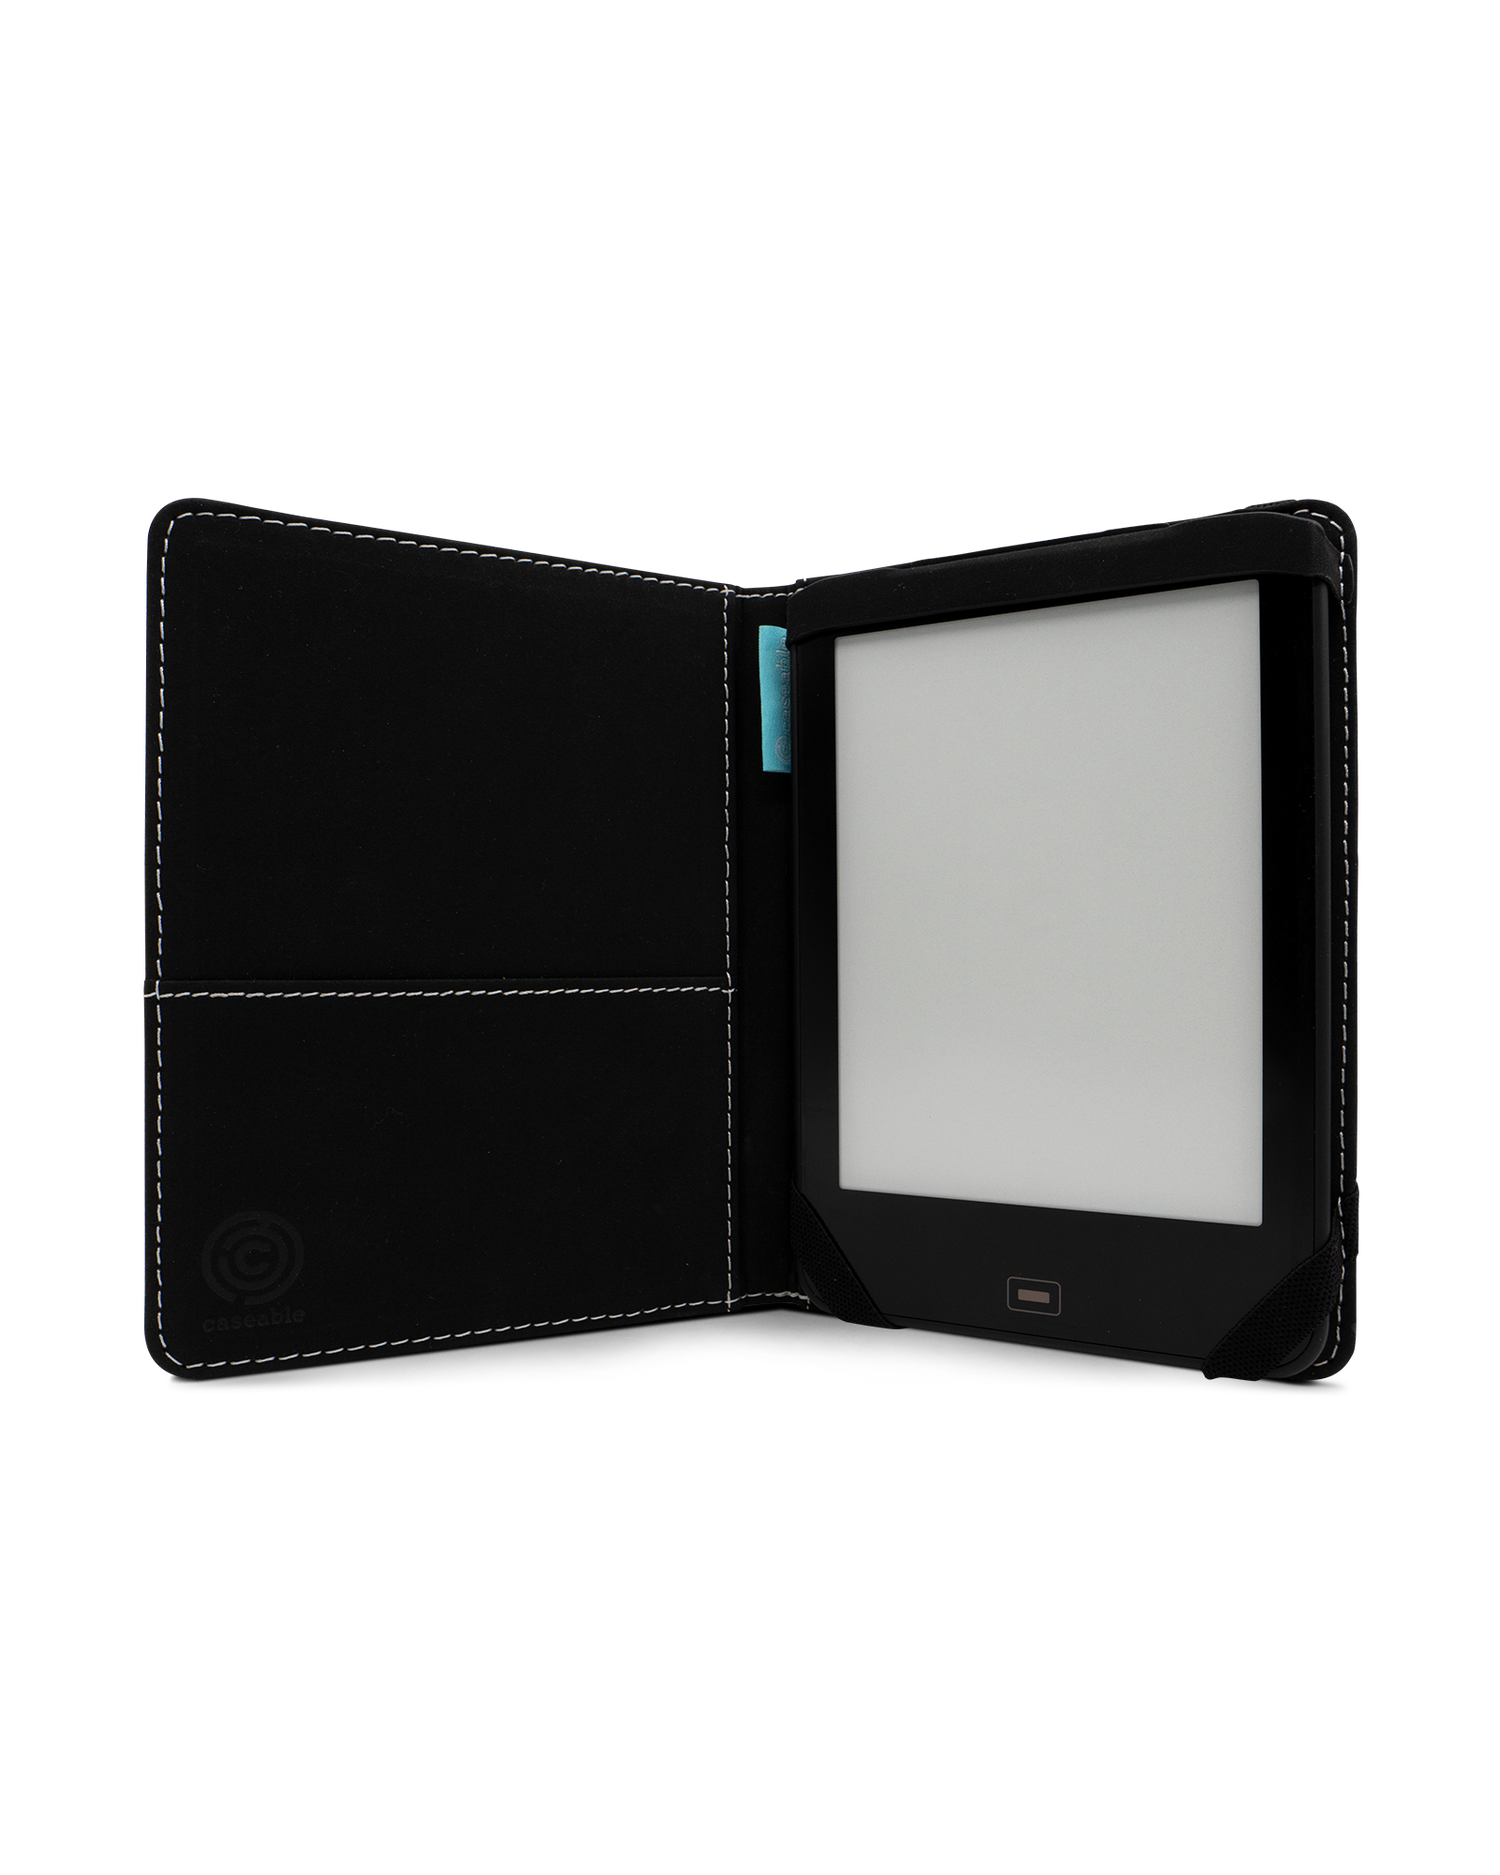 Fugus! eReader Case for tolino vision 1 to 4 HD: Opened interior view